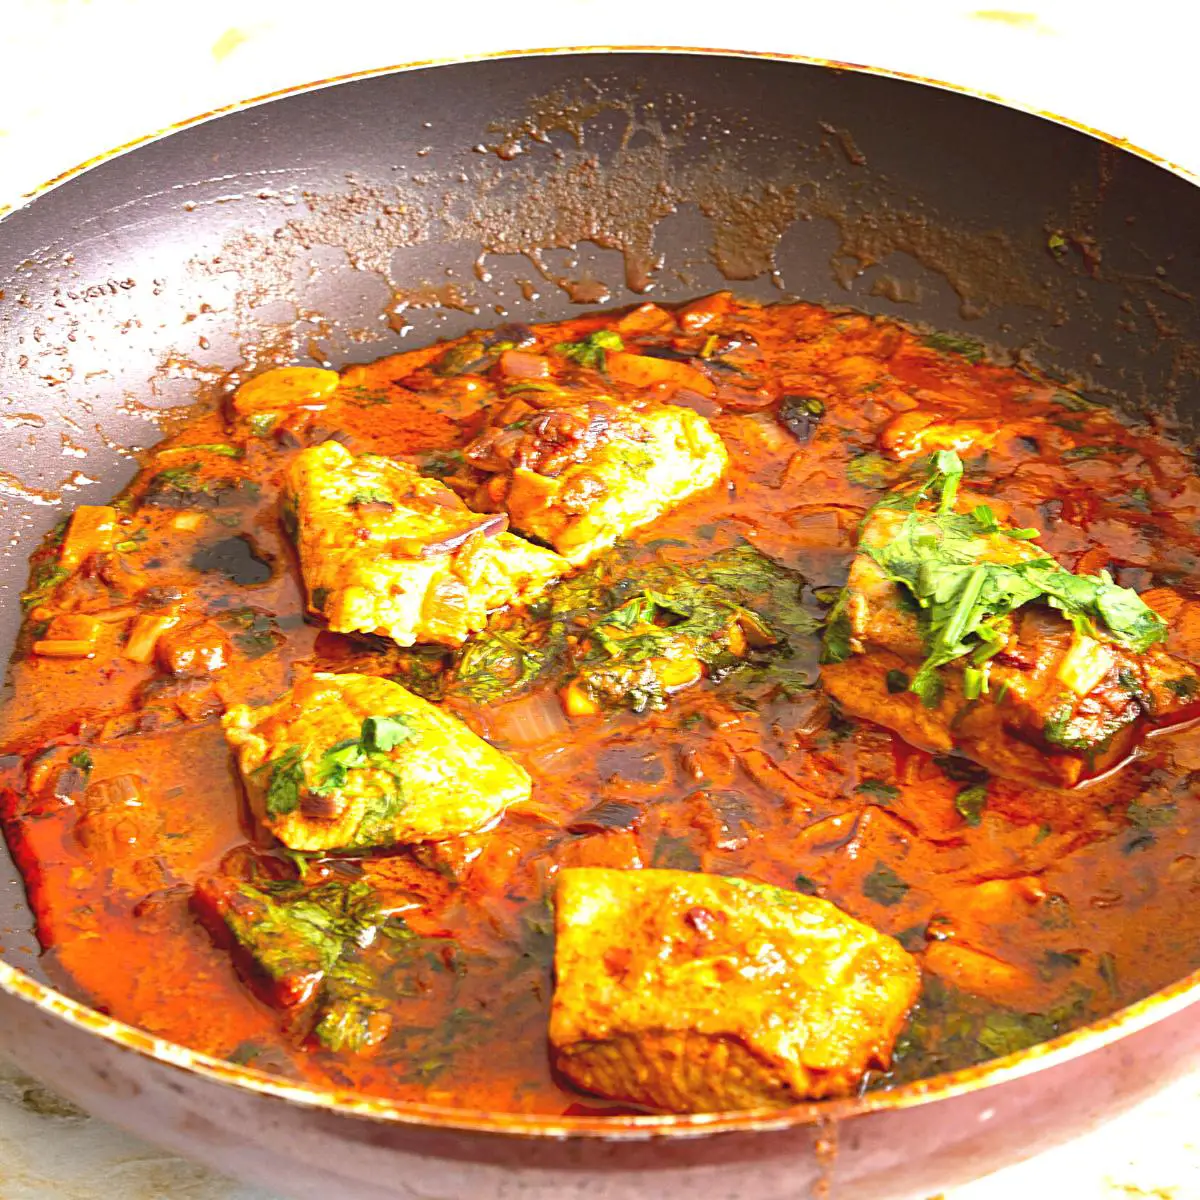 A skillet with fish curry.